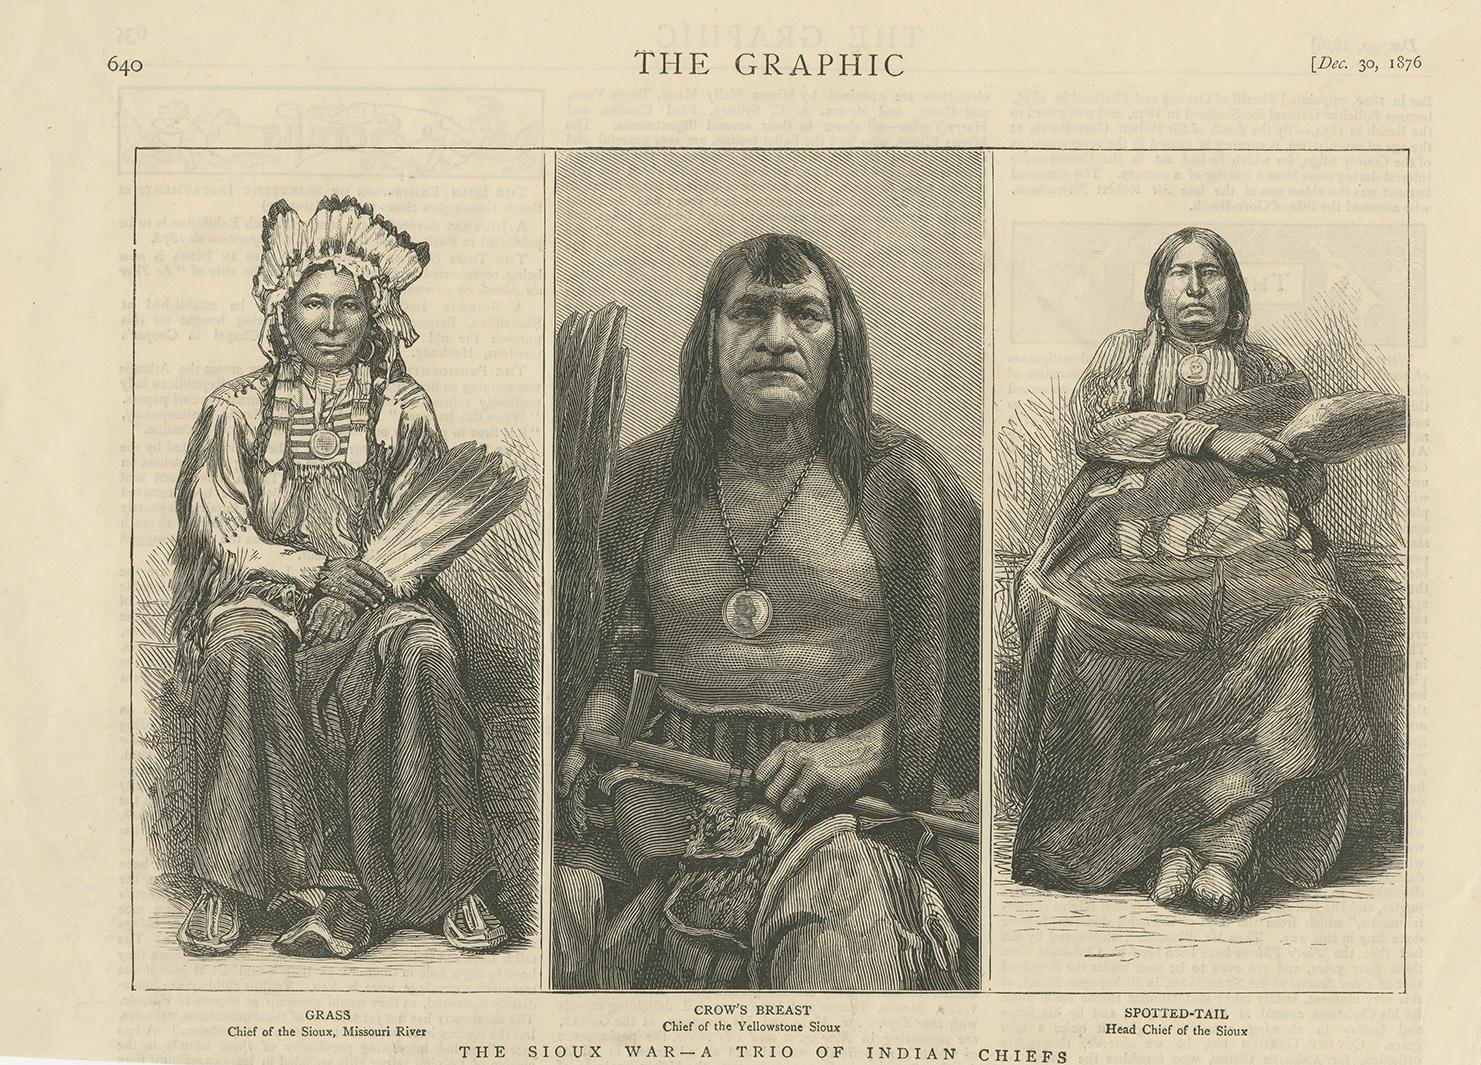 Antique print titled 'The Sioux War - A Trio of Indian Chiefs'. Print of three Indian chiefs including the chief of the Sioux (Missouri River), the chief of the Yellowstone Sioux and the head chief of the Sioux. This print originates from 'The